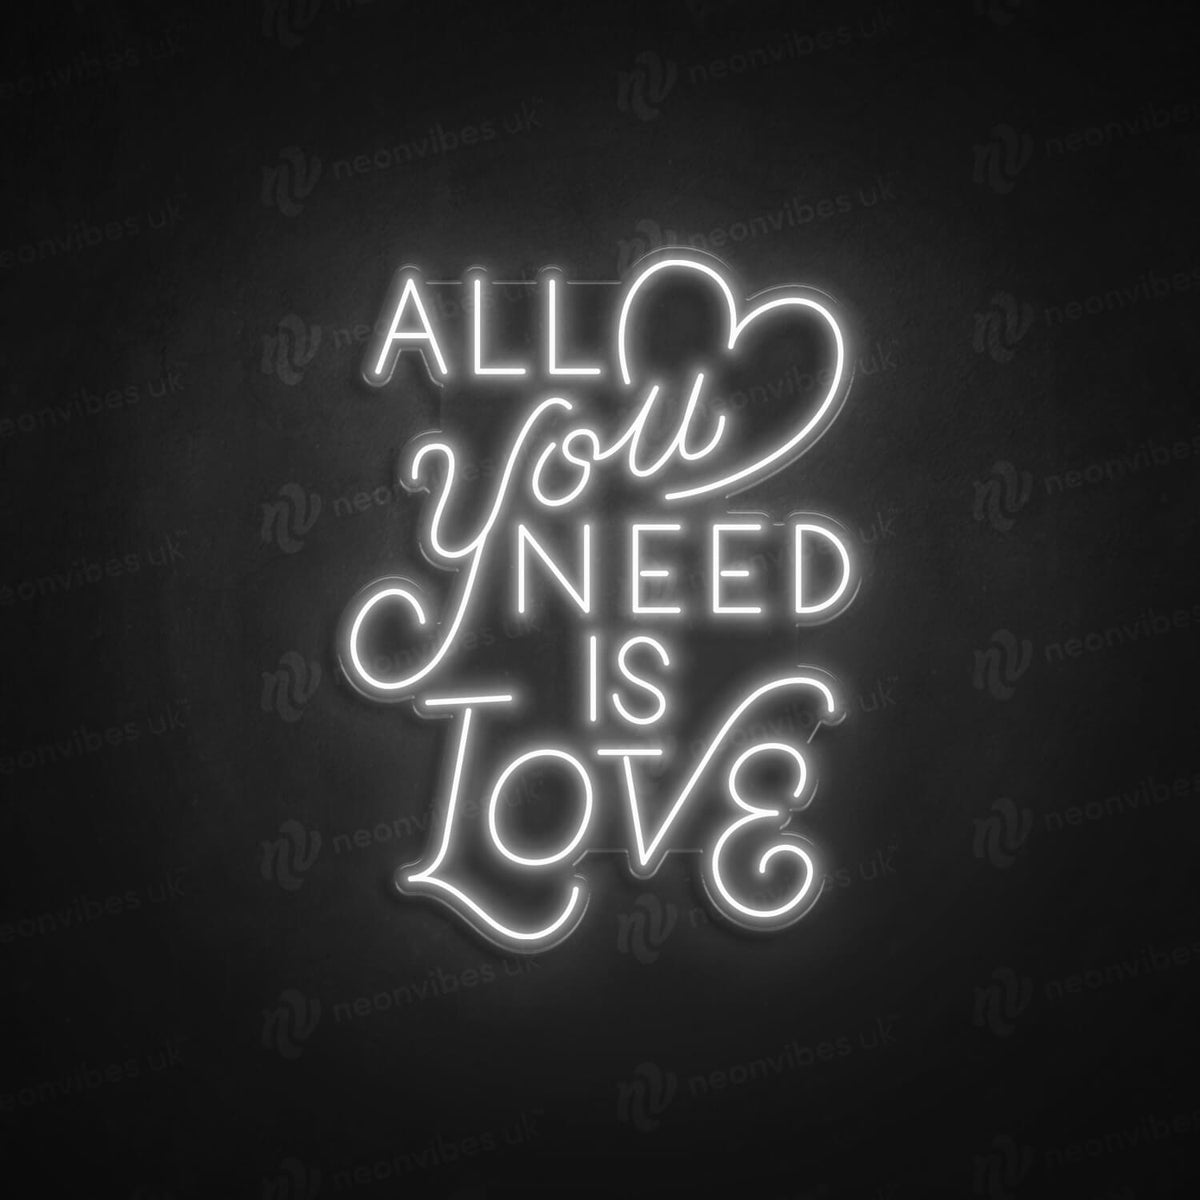 All you need is love neon sign